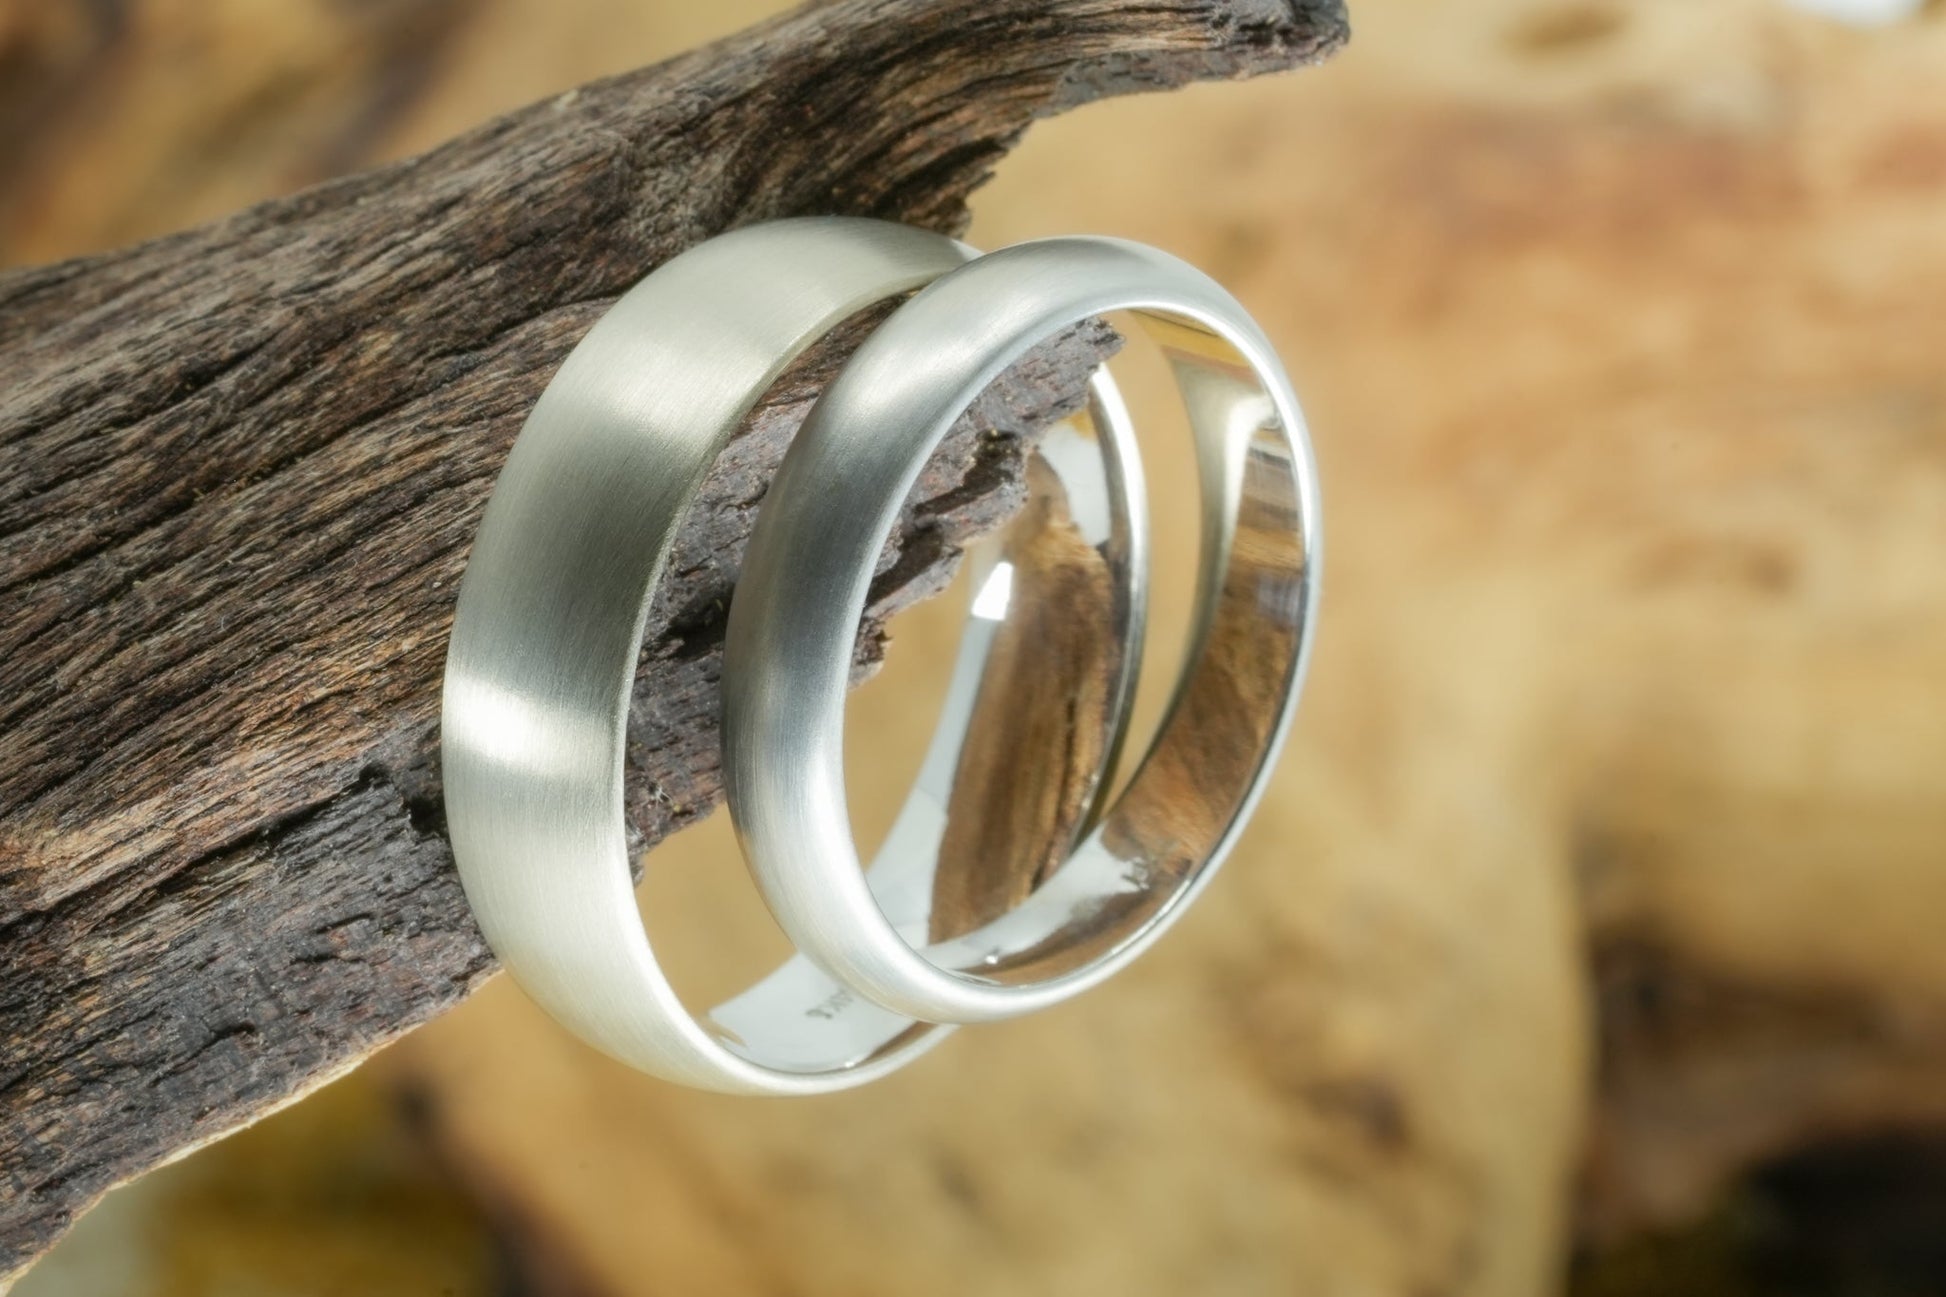 White gold "Jackson" and "Laramore" wedding bands on a branch.